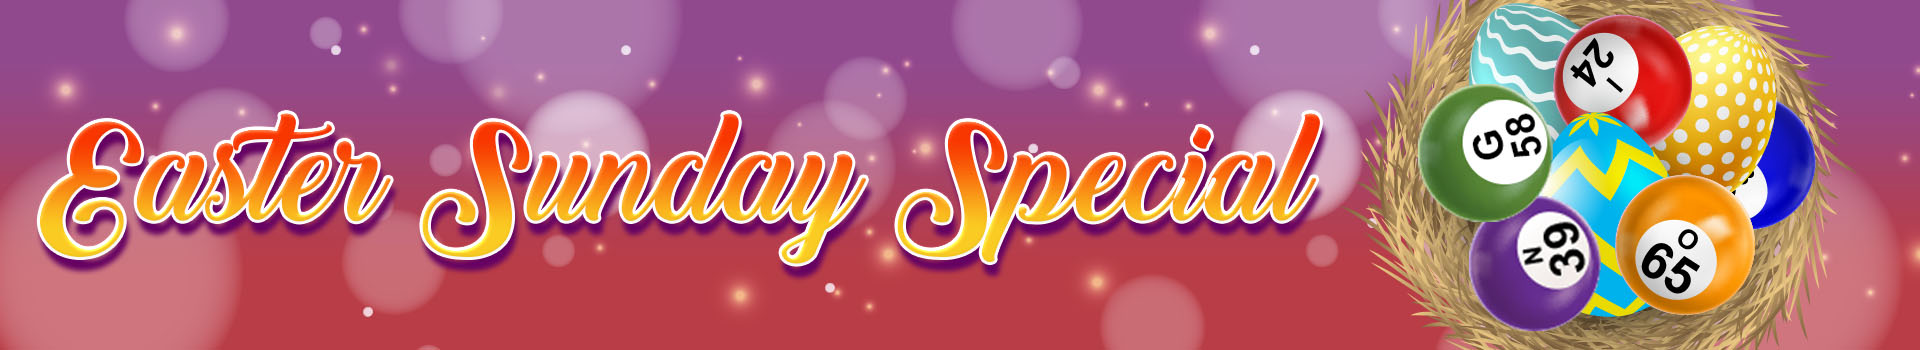 easter-sunday-special banner